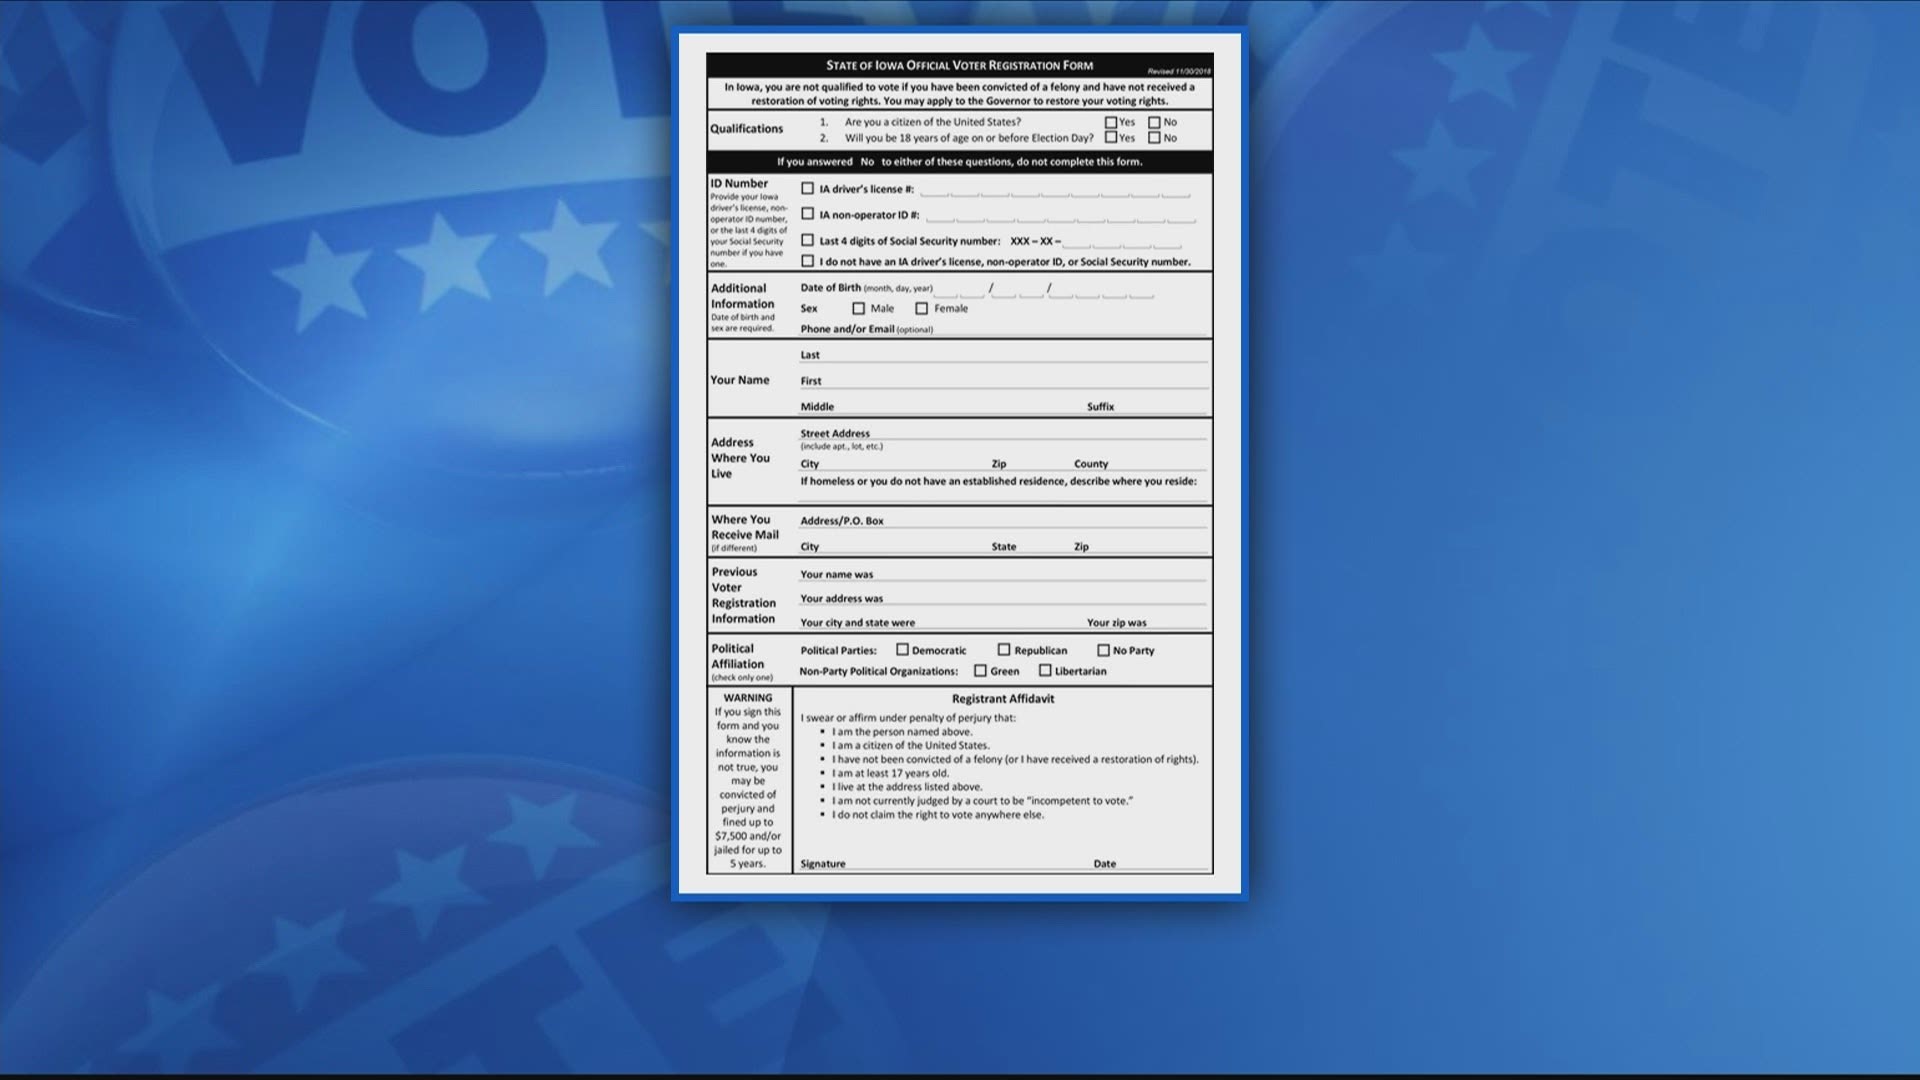 With Gov. Kim Reynolds' executive order, it's important you know how to register to vote.